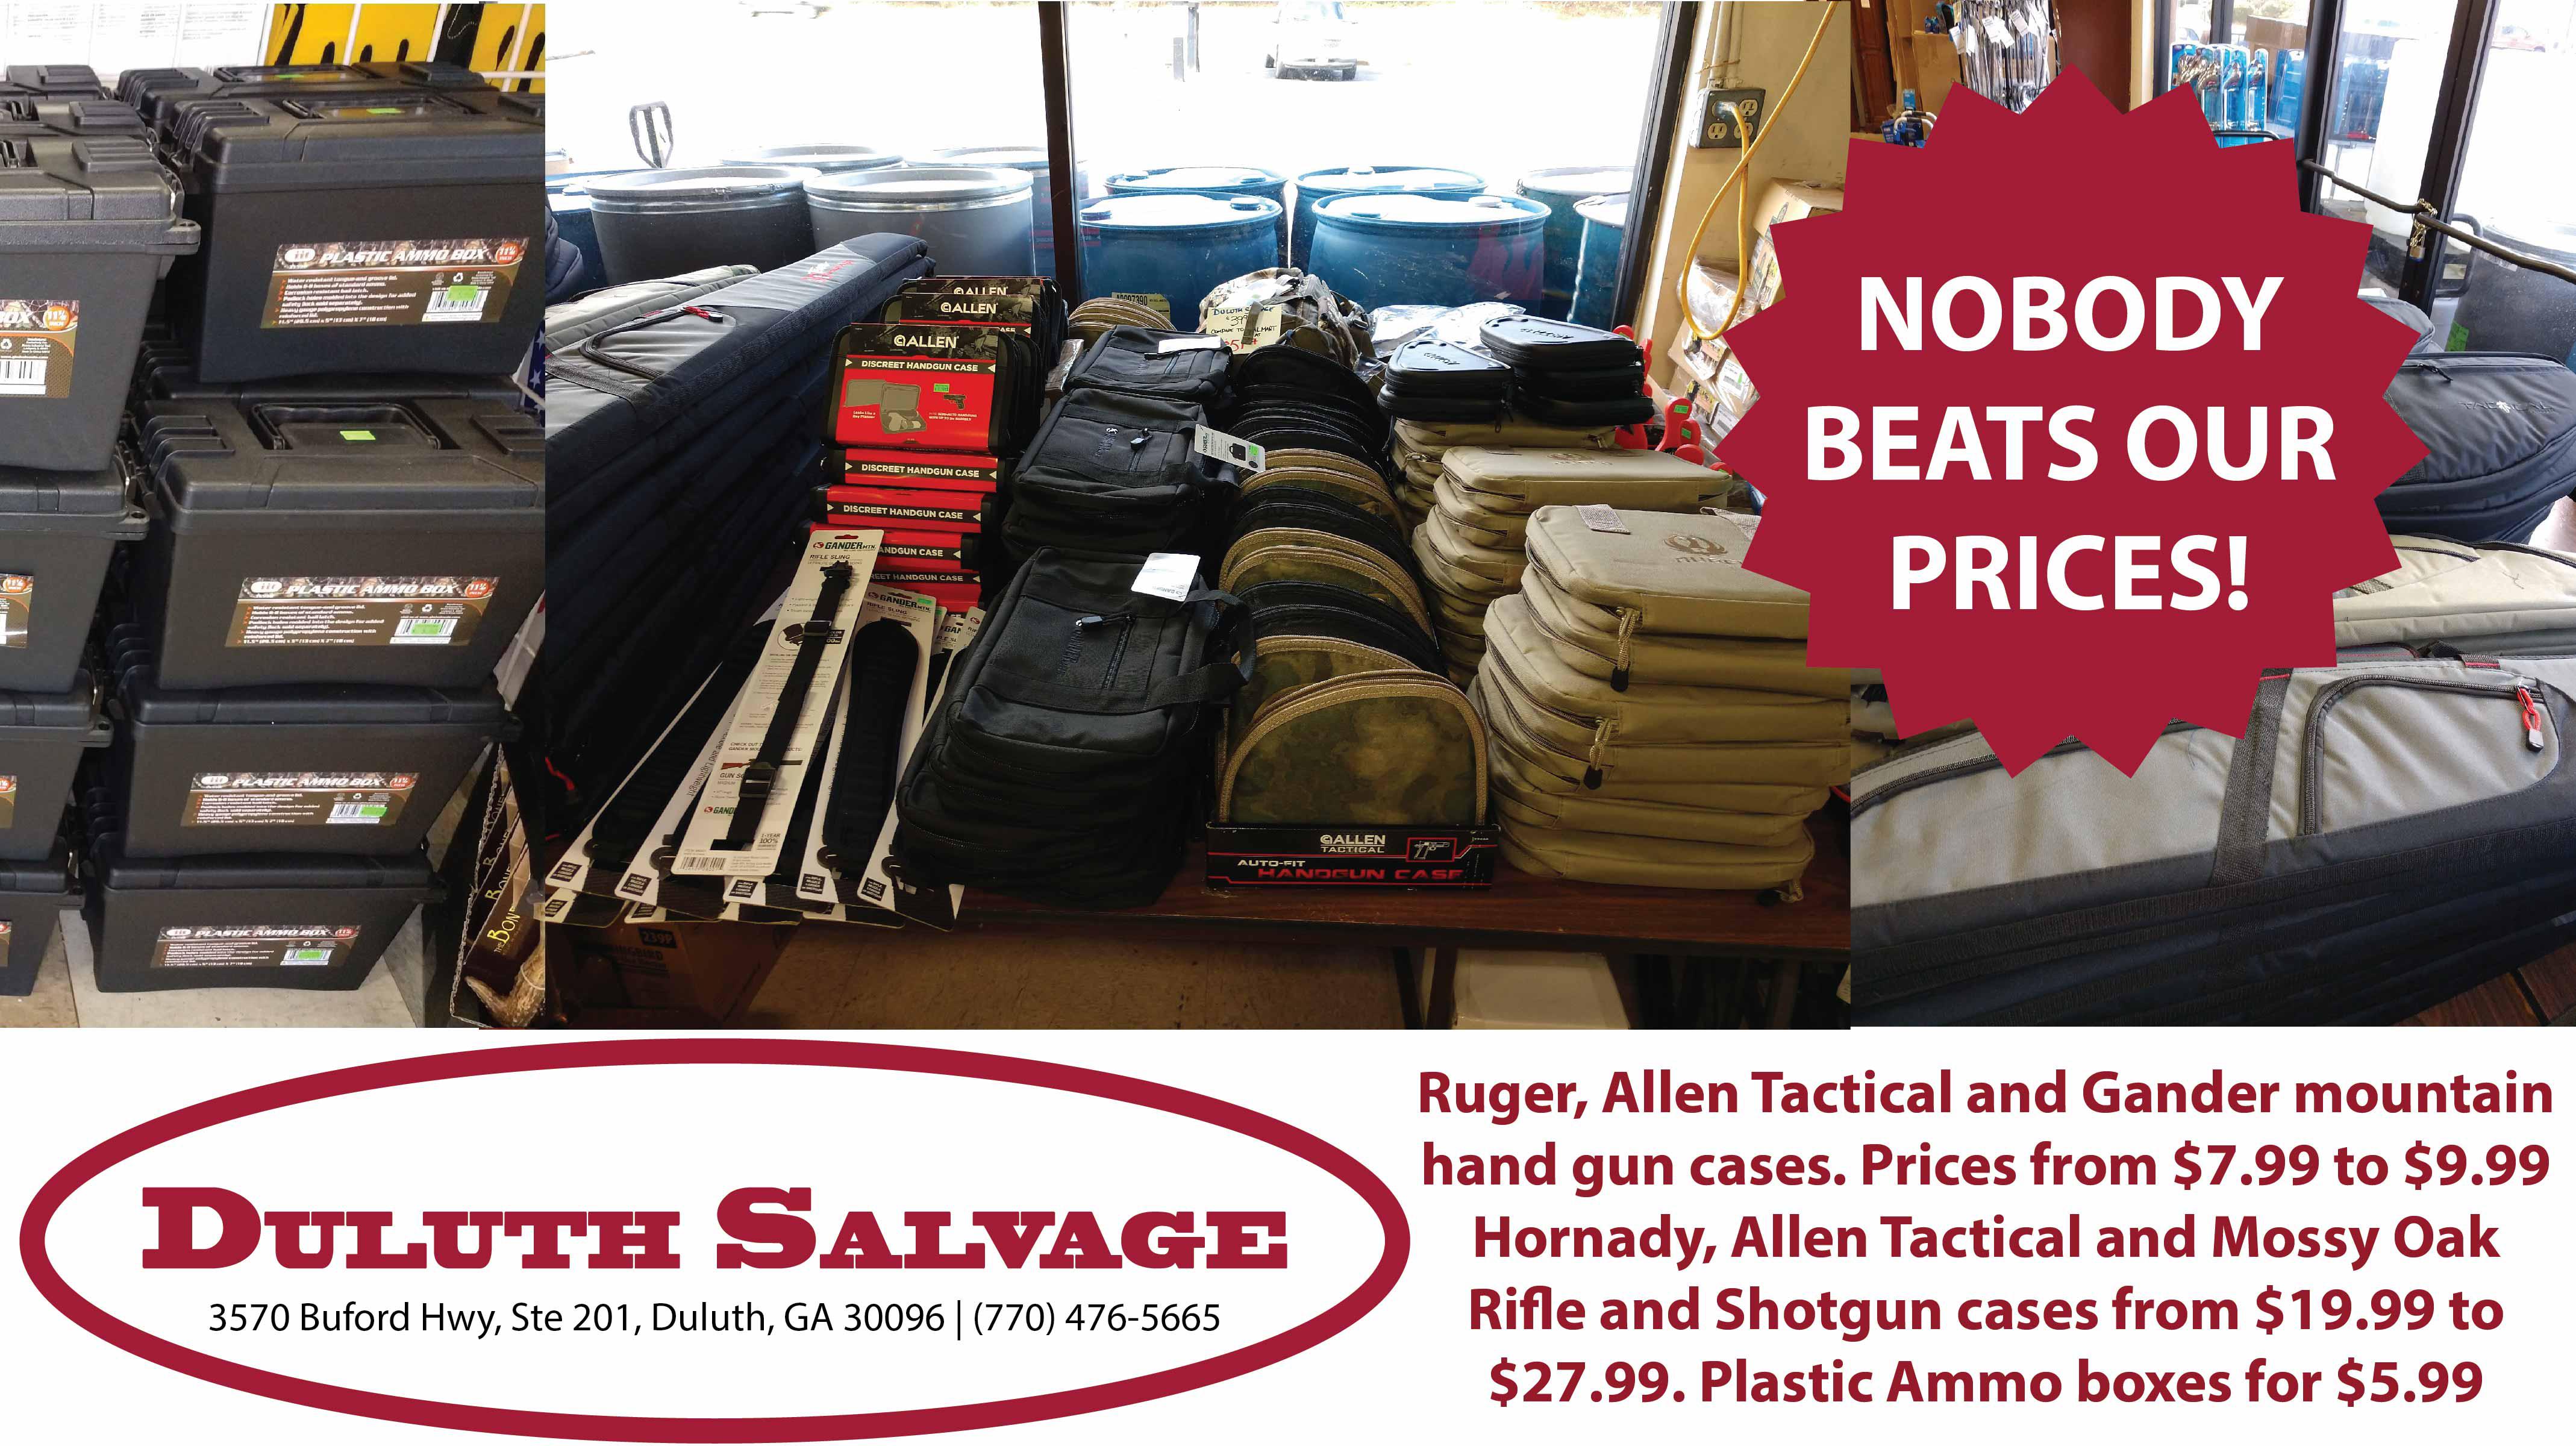 Ruger, Allen Tactical and Gander mountain hand gun cases. Prices from $7.99 to $9.99
Hornady, Allen Tactical and Mossy Oak Rifle and Shotgun cases from $19.99 to $27.99 
Plastic Ammo boxes for $5.99